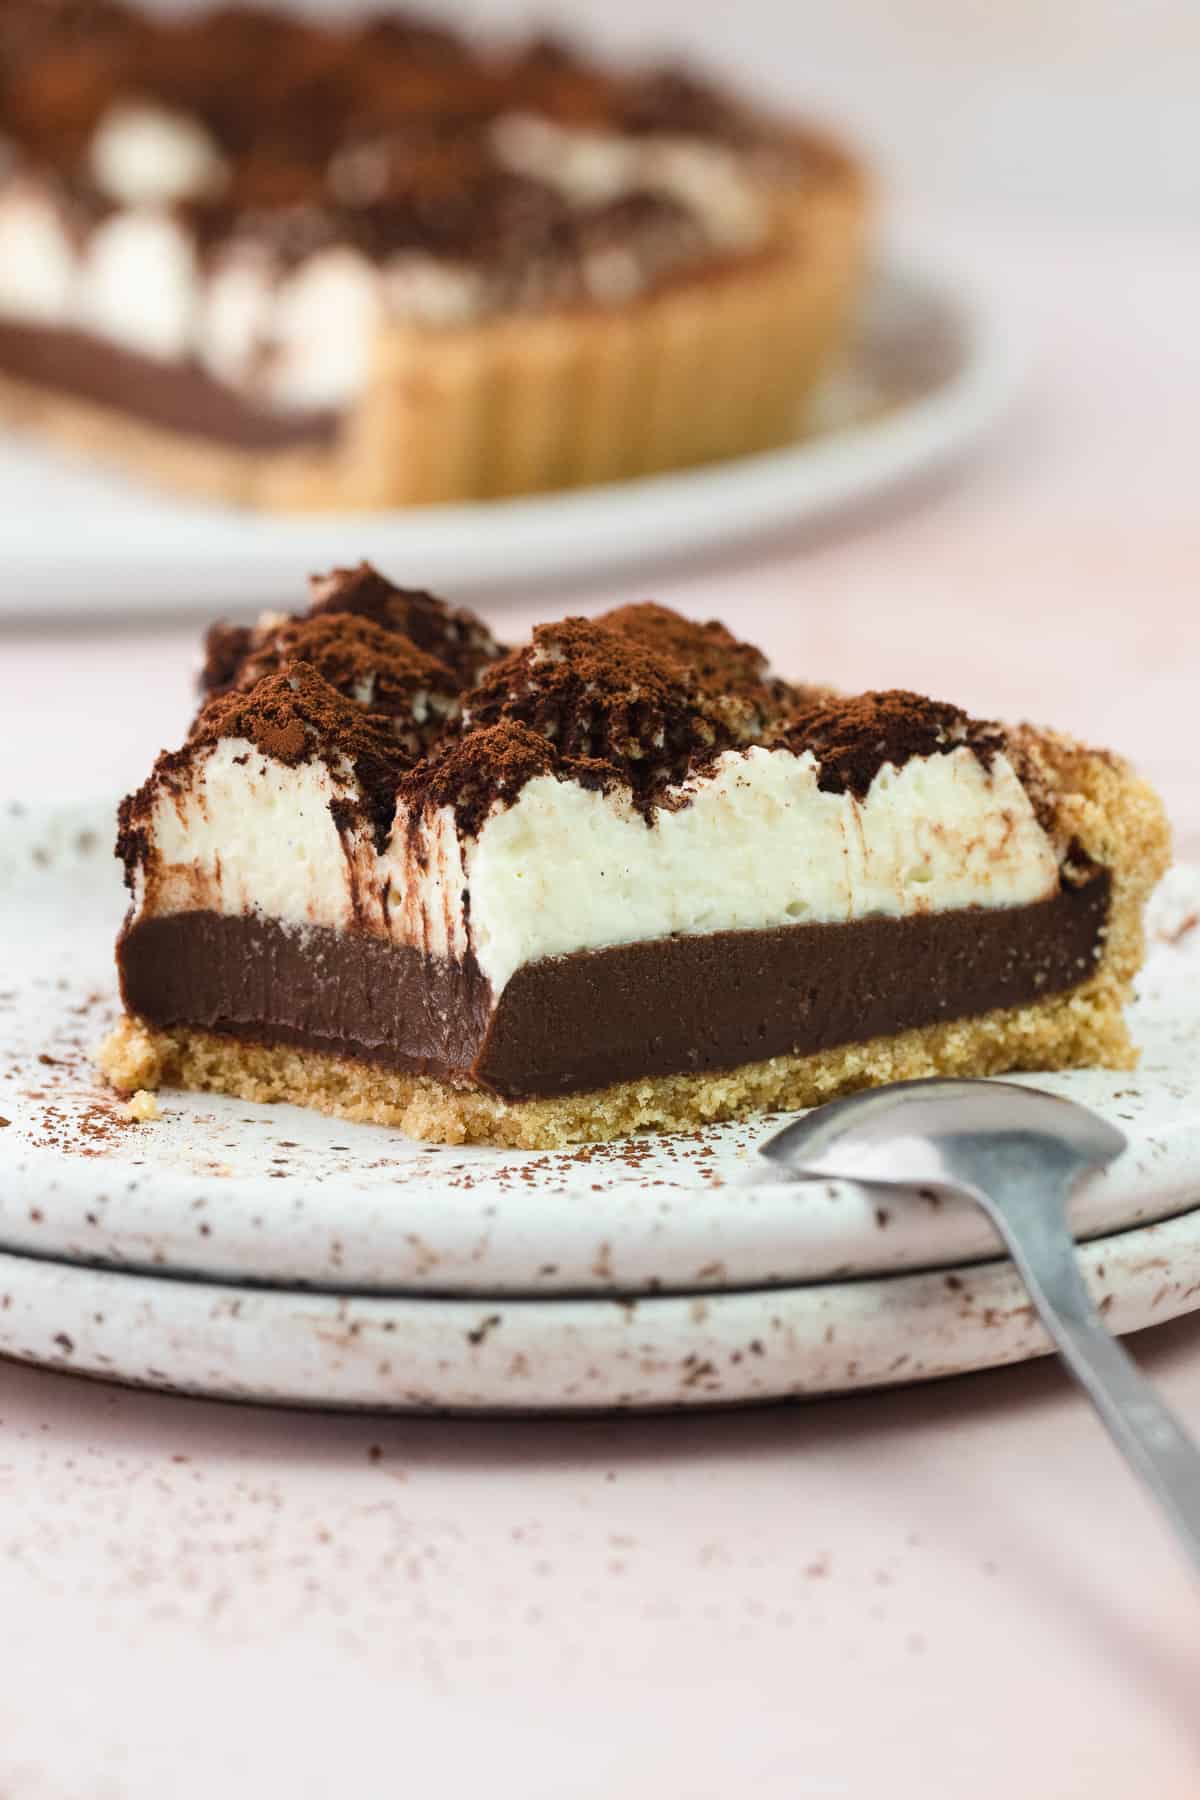 A close up of a slice of tiramisu tart on a plate with a spoon on the side